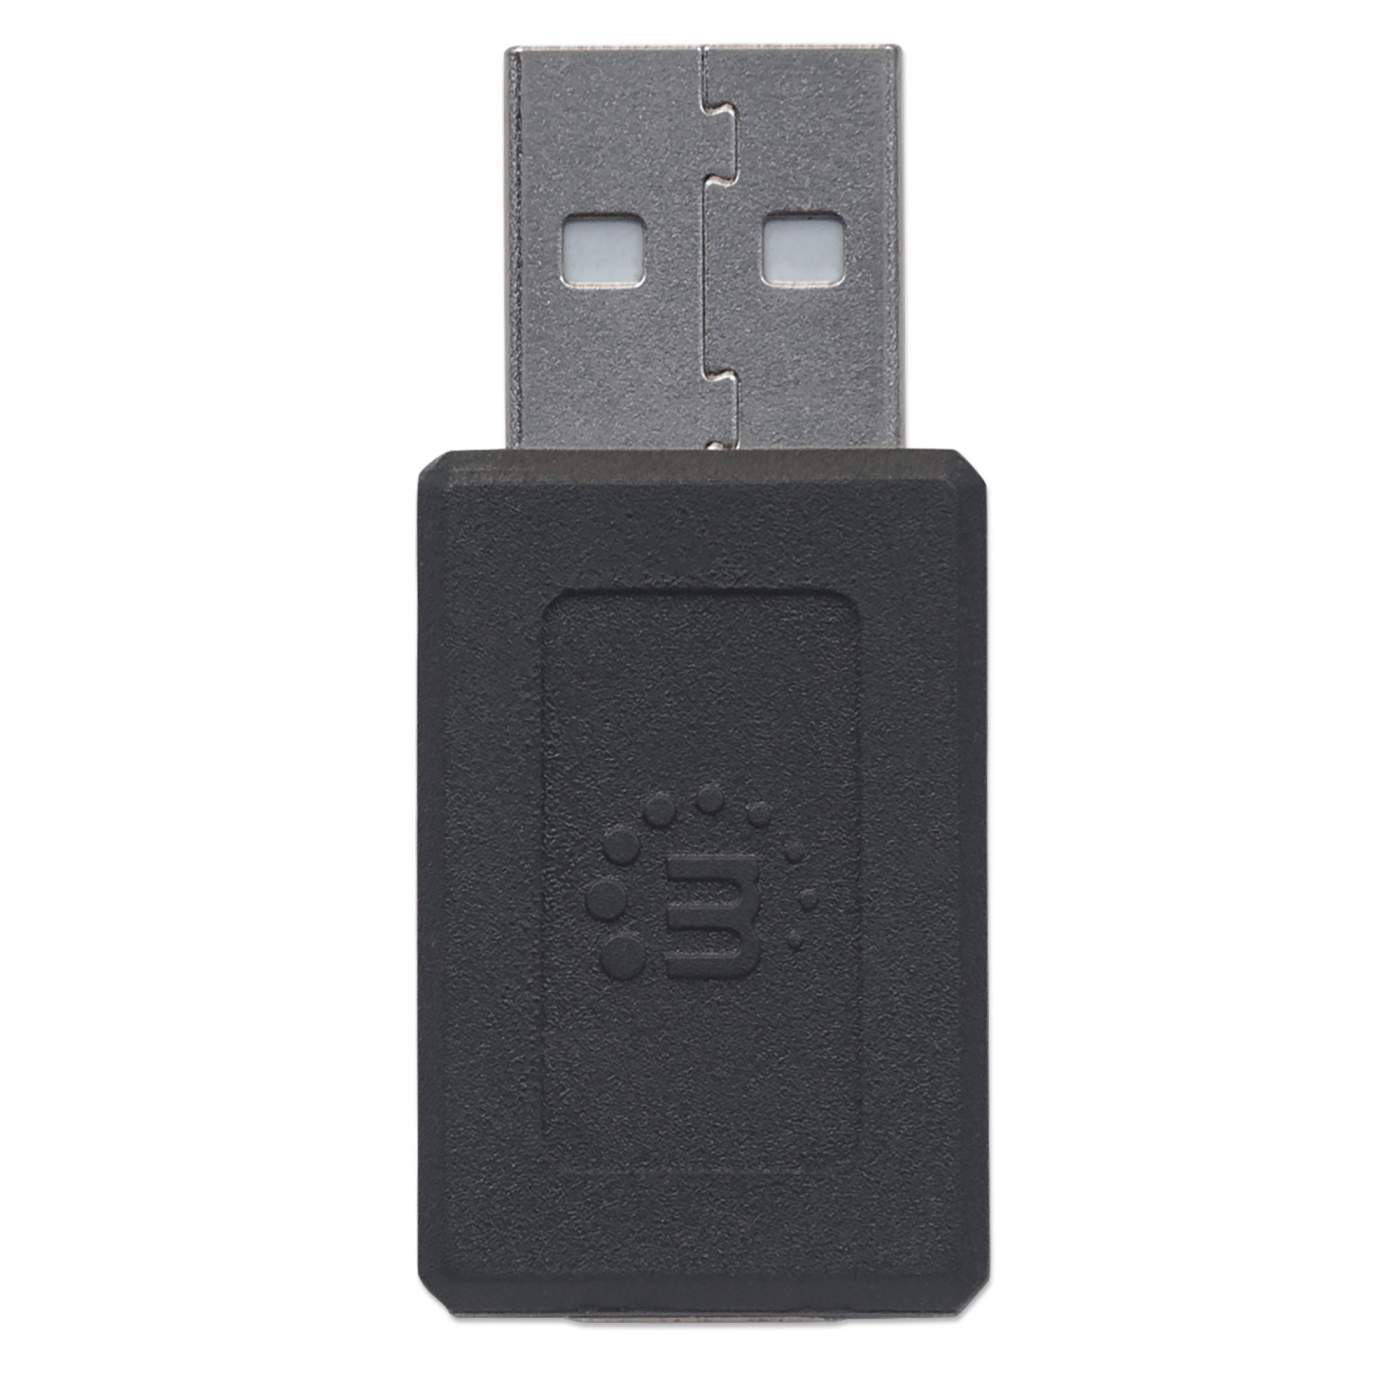 USB 2.0 Type-C to Type-A Adapter Image 8